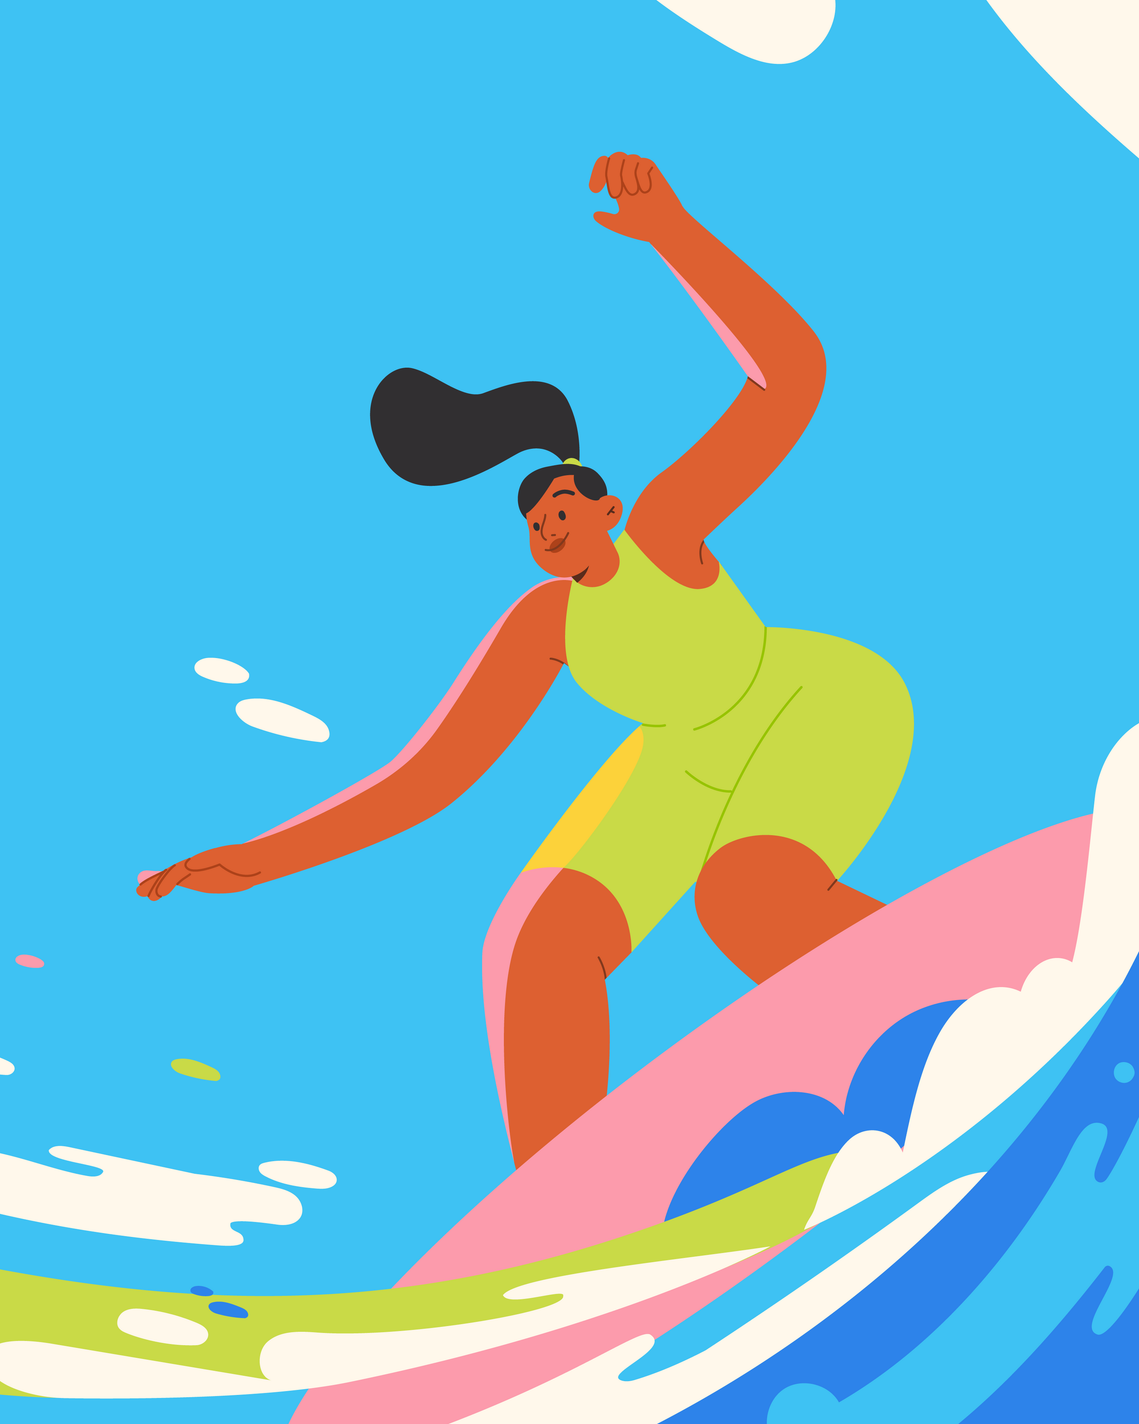 Close-up on dark-haired light-brown woman surfing a pink board by a bright blue sky and energetic wave. She wears a lemon green suit.